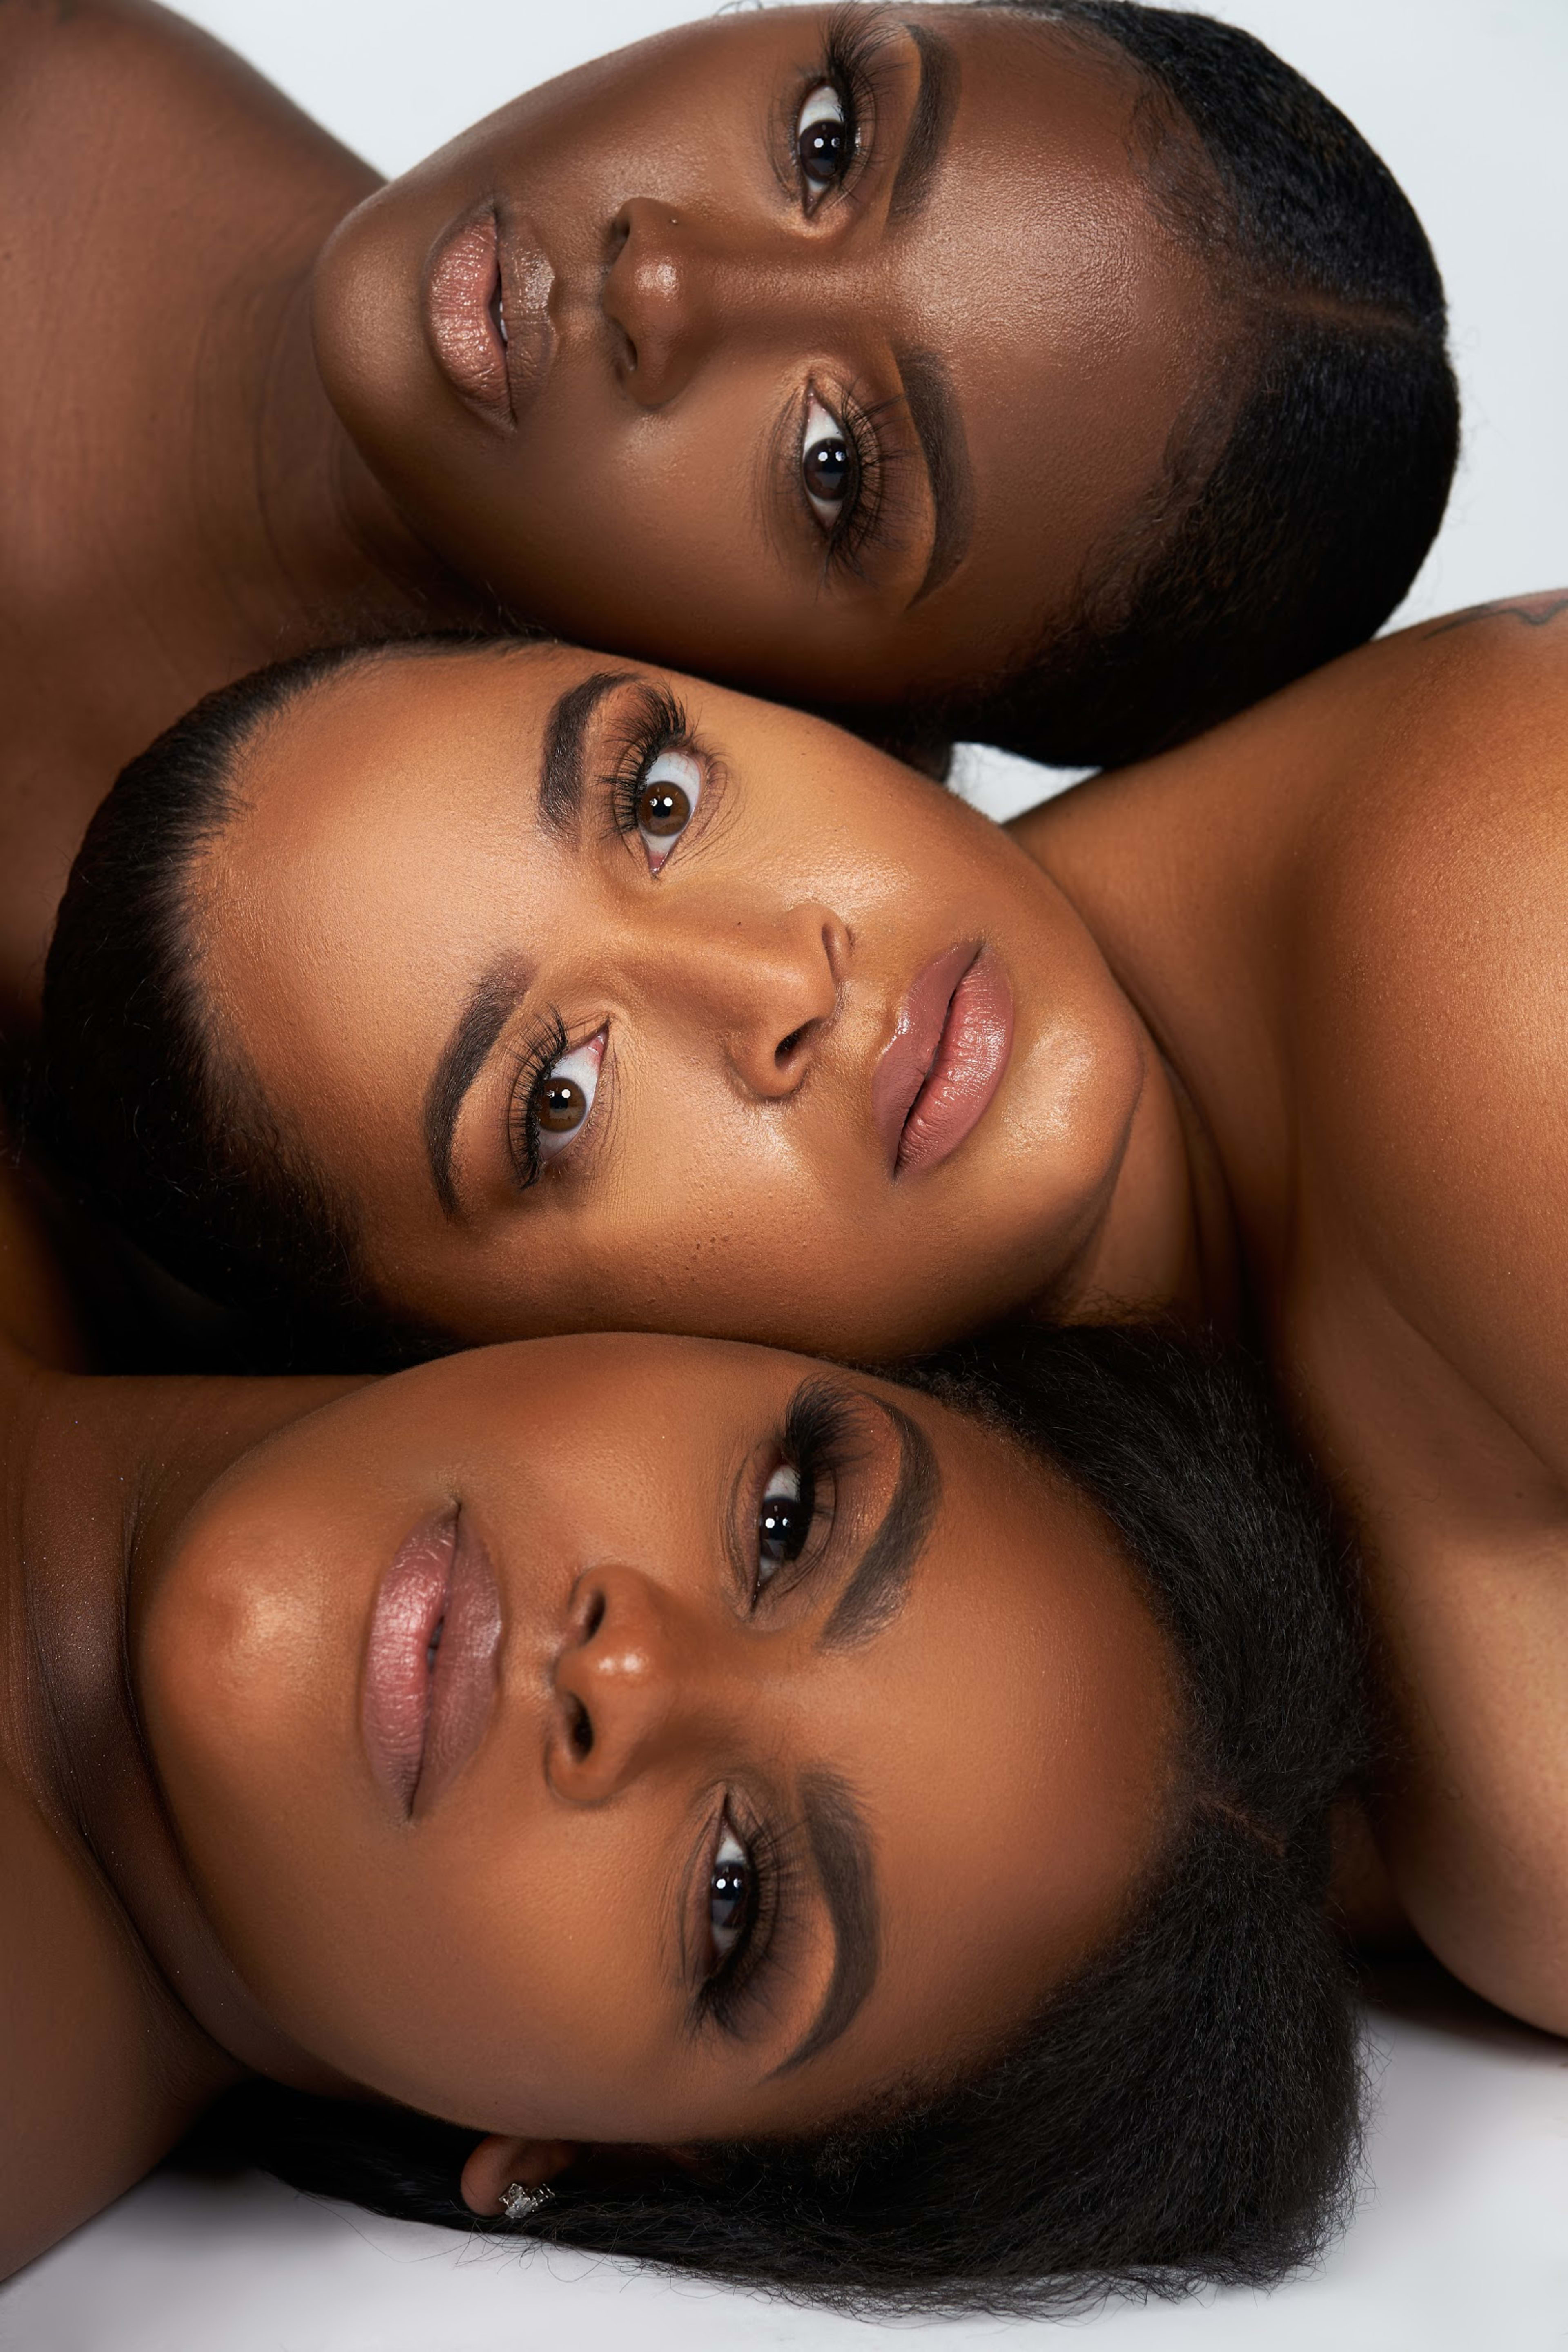 A trio of females posing for a photoshoot, lying side-by-side.